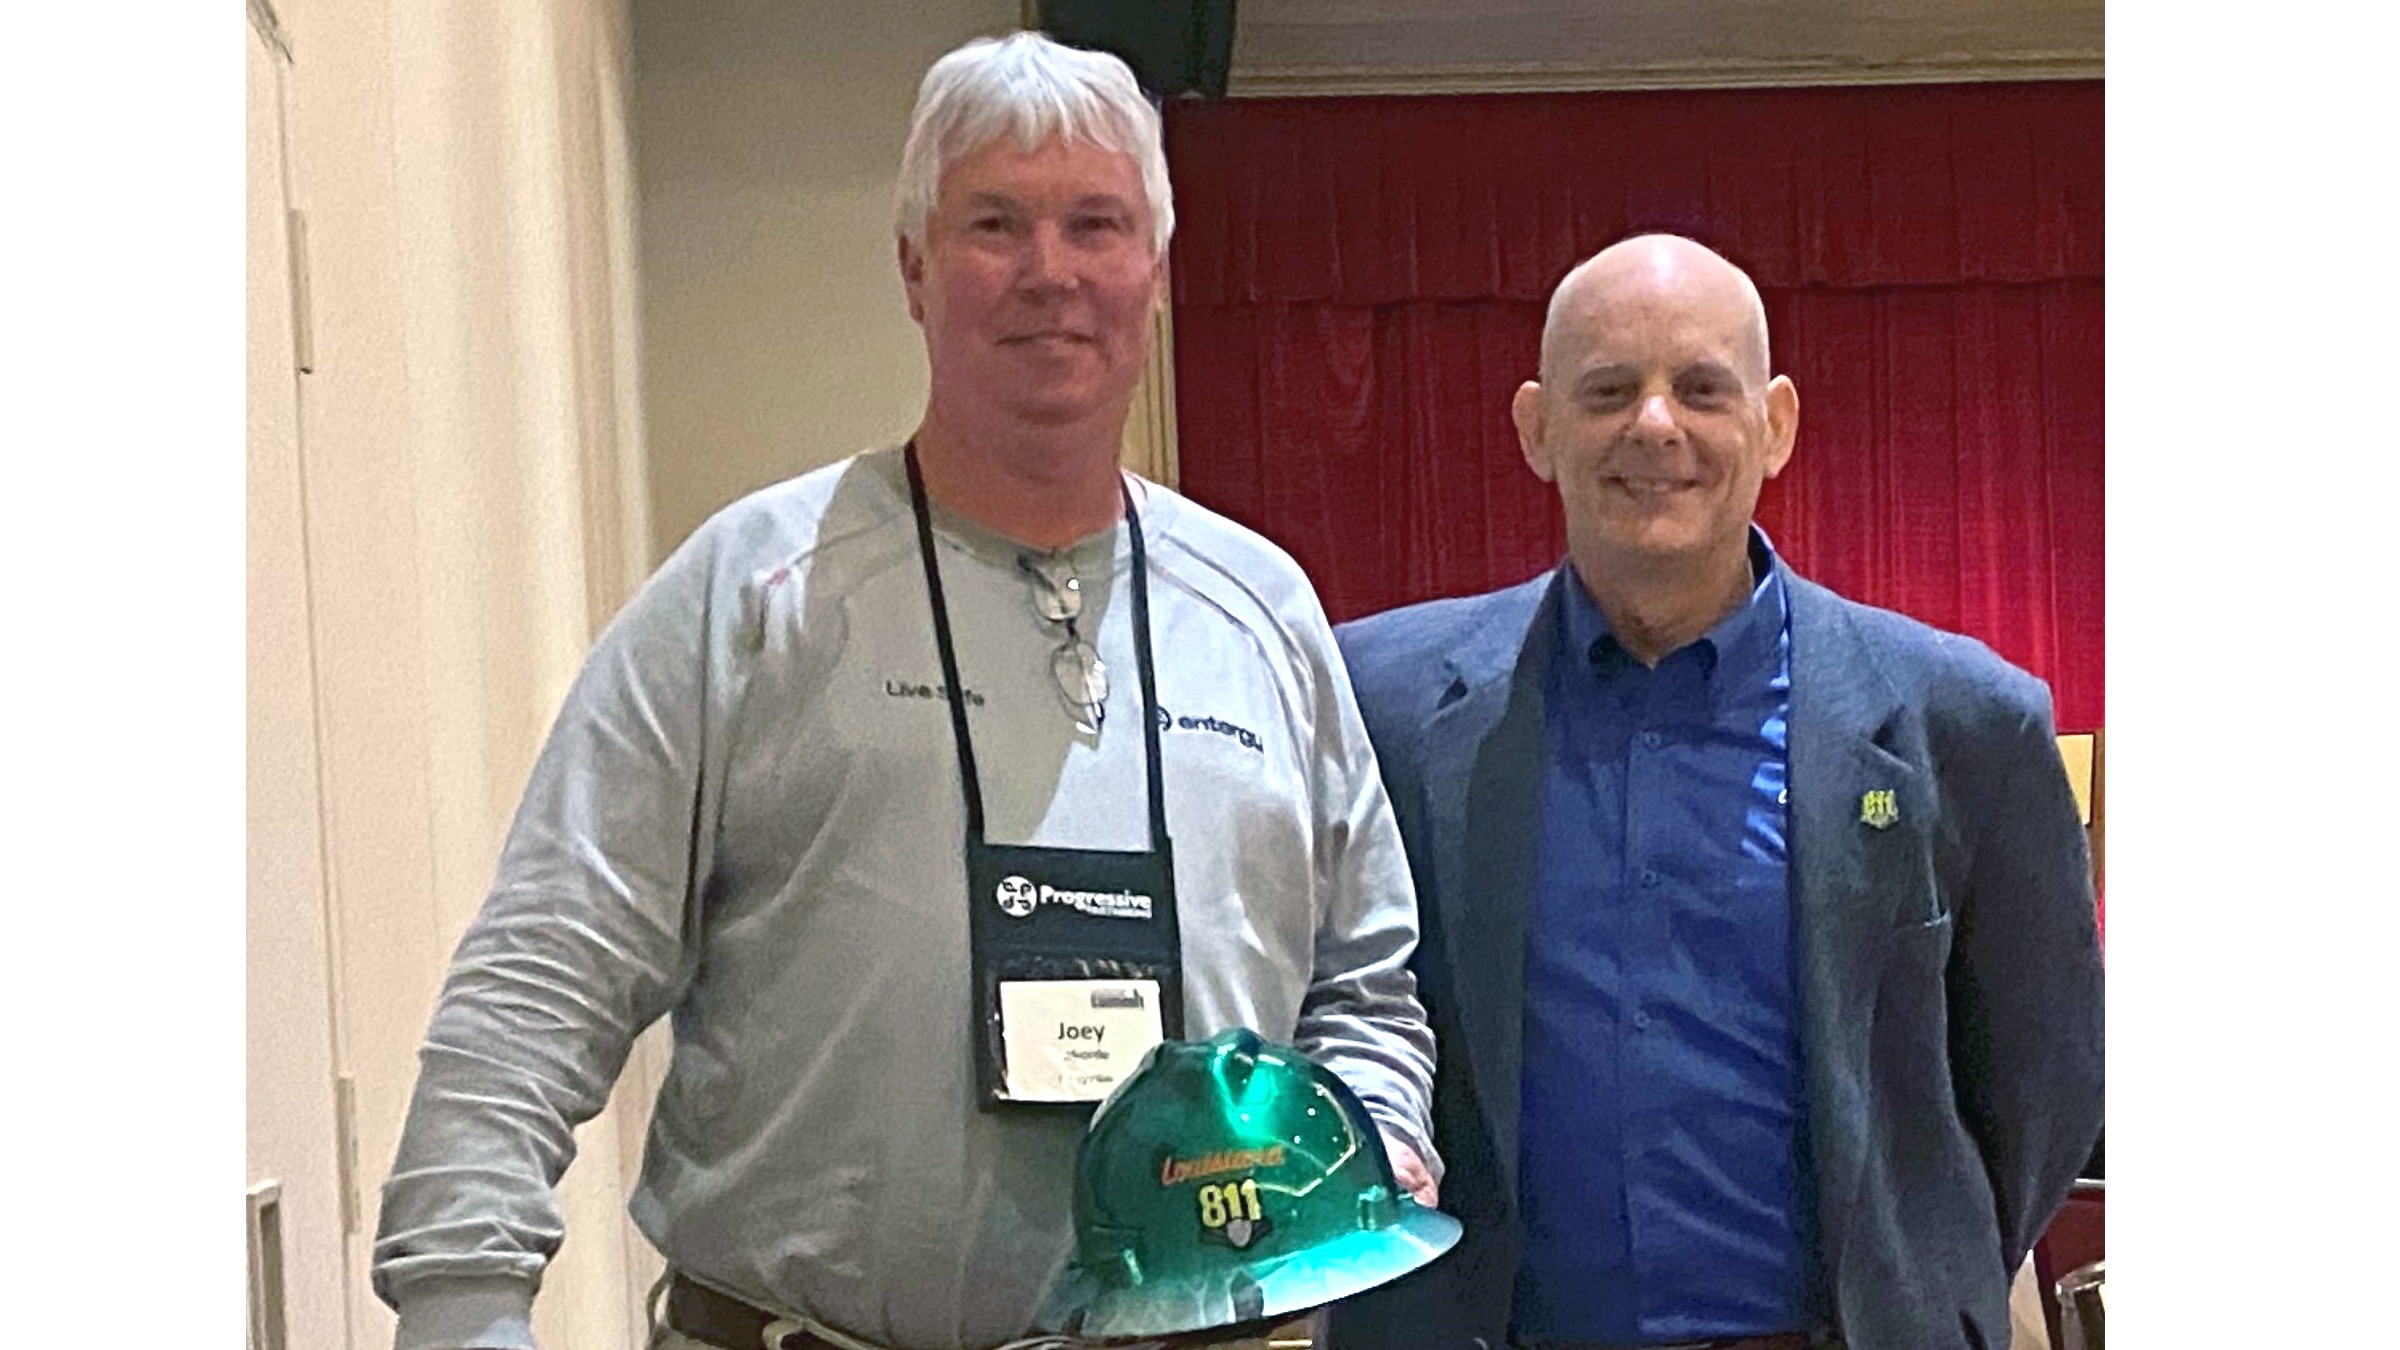 Pictured is Joey Laborde, Entergy gas locator, with Brent Saltzman, Louisiana 811 executive director, at the Damage Prevention Summit in Baton Rouge.